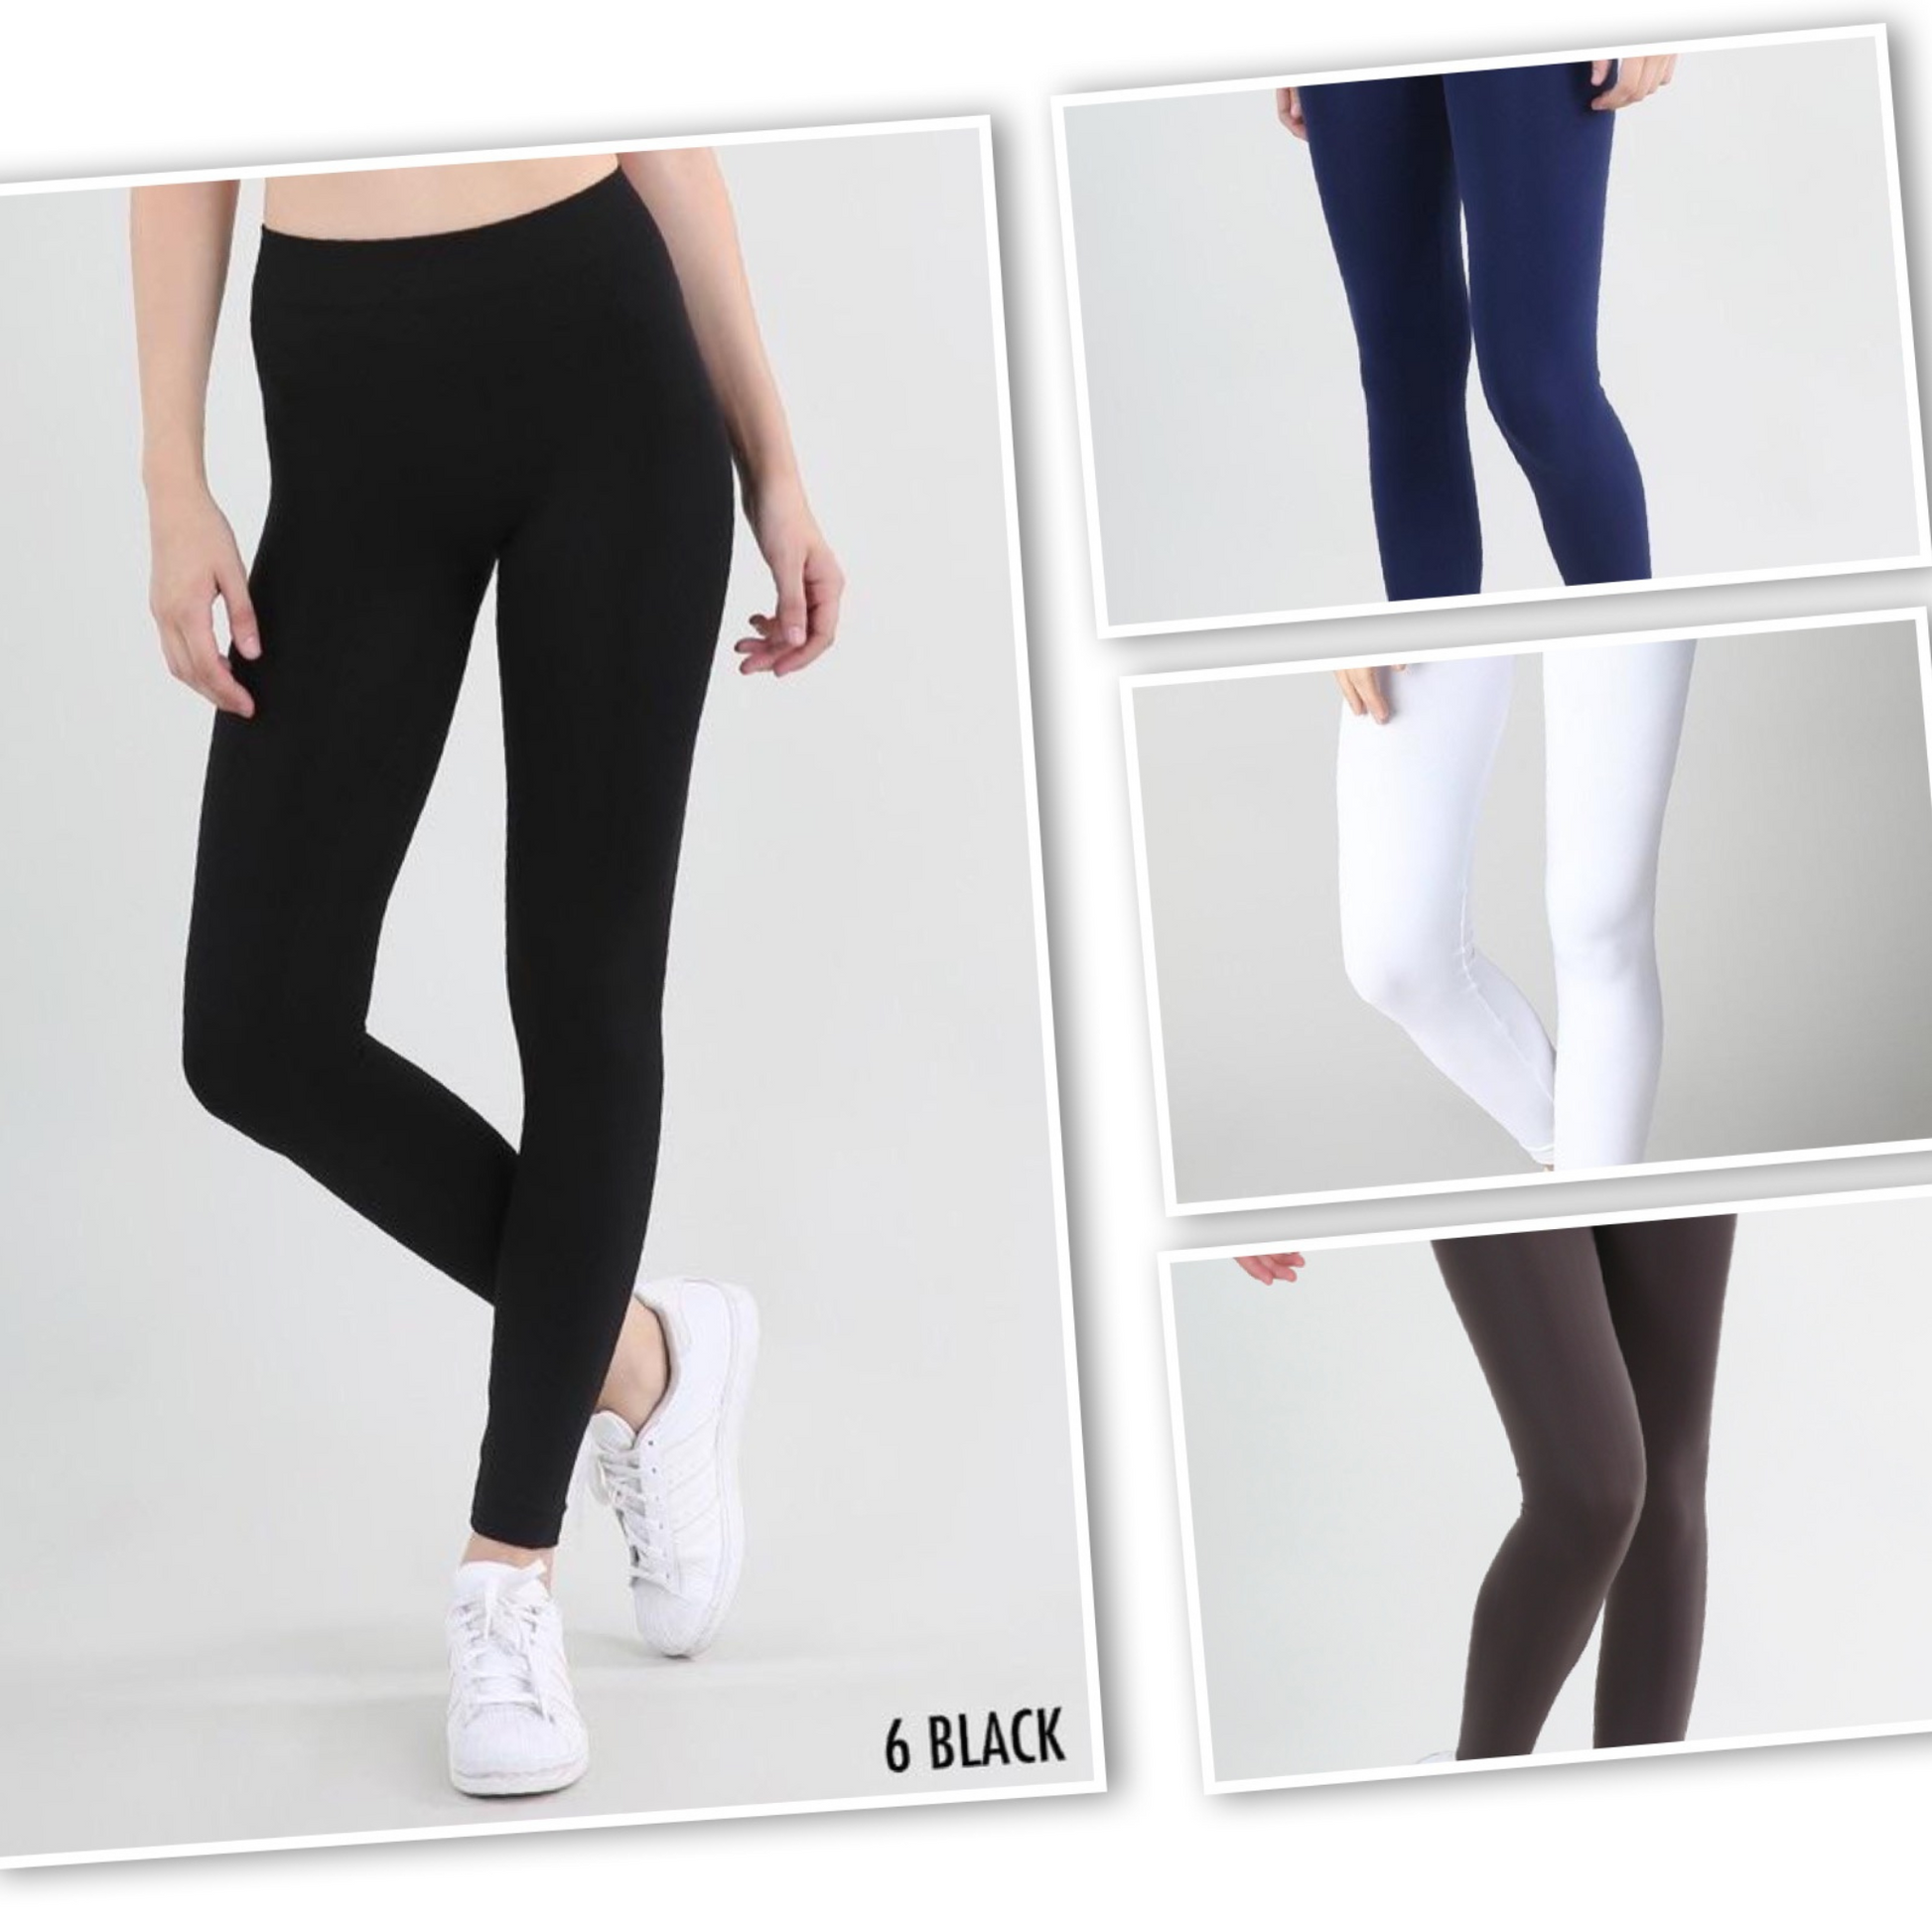 Nikibiki ankle length leggings. Available in a variety of colors